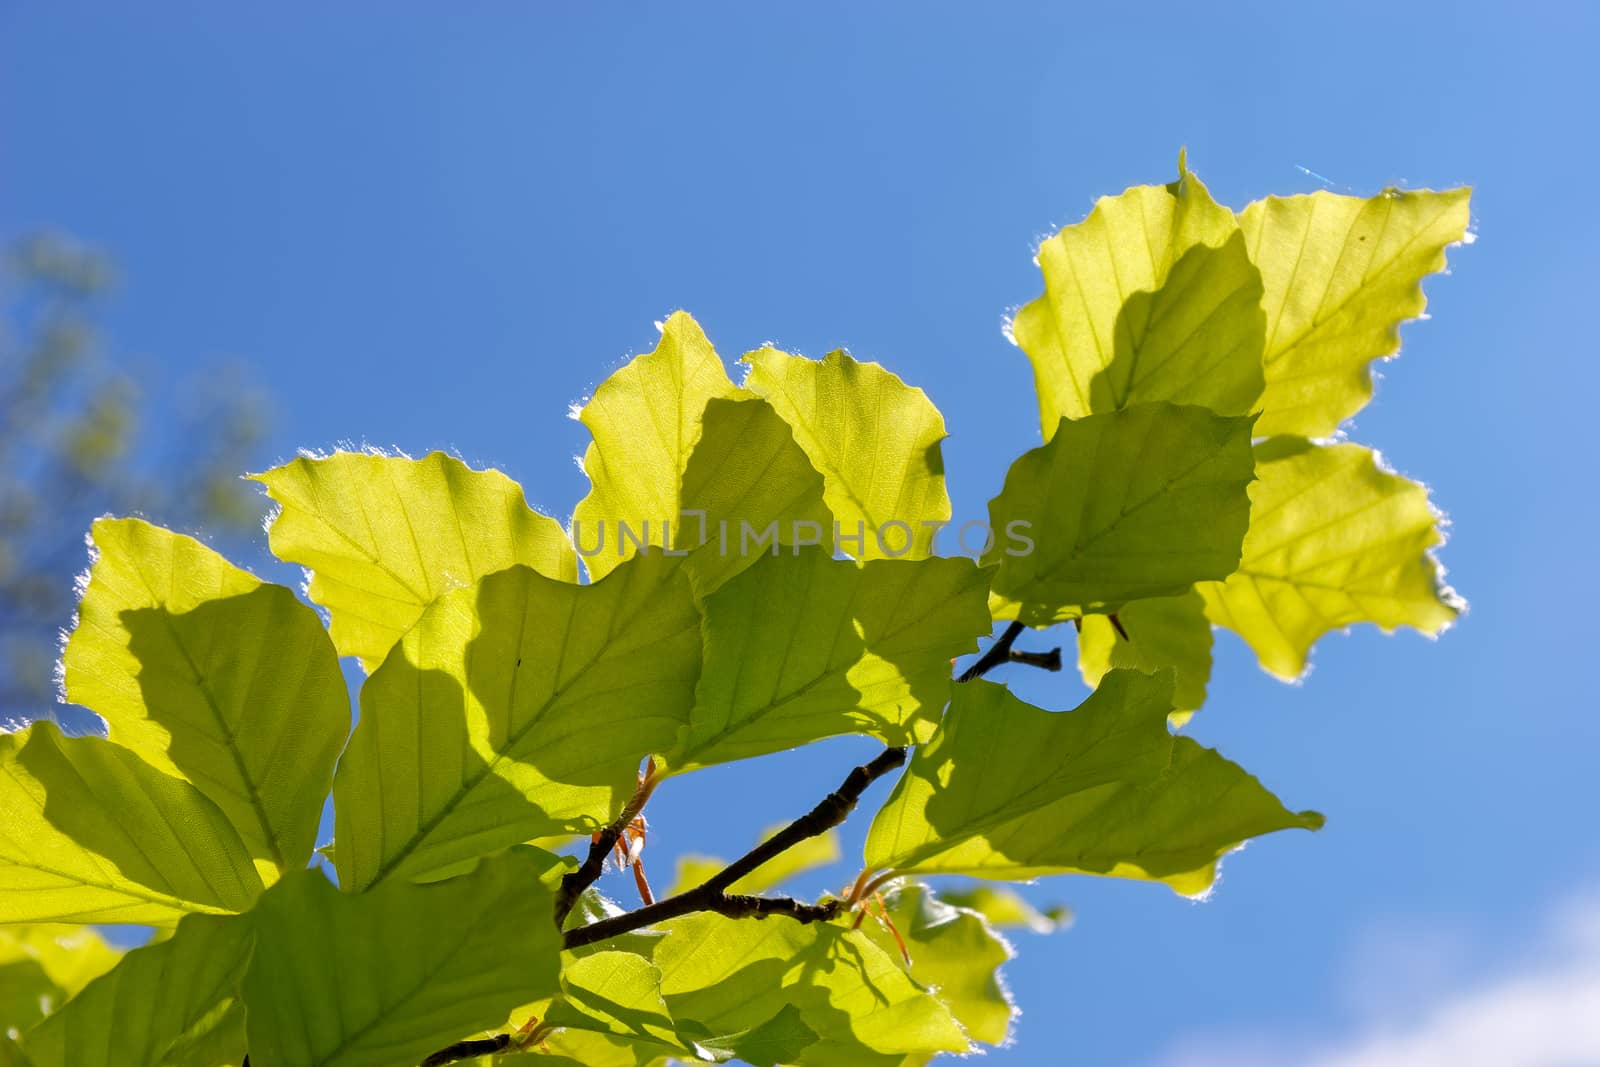 Close-up of some leaves of a Beech (fagaceae) tree in an english garden